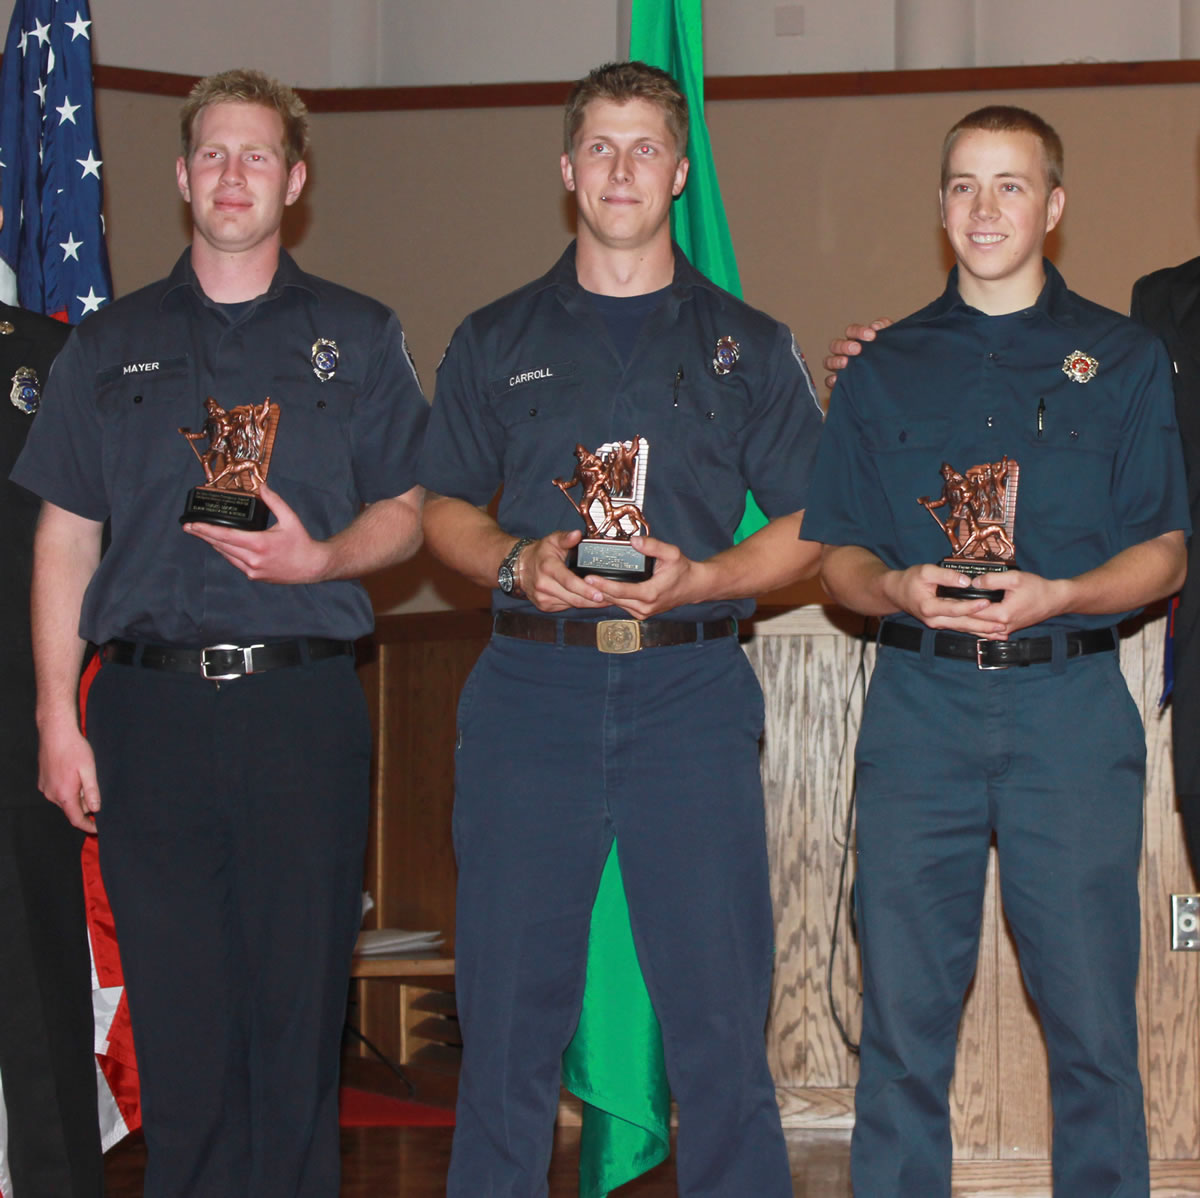 Ridgefield: Bryan Carroll, from left, Travis Mayer and Josh Haldeman of Clark County Fire &amp; Rescue just graduated from Washington State Firefighters Academy.